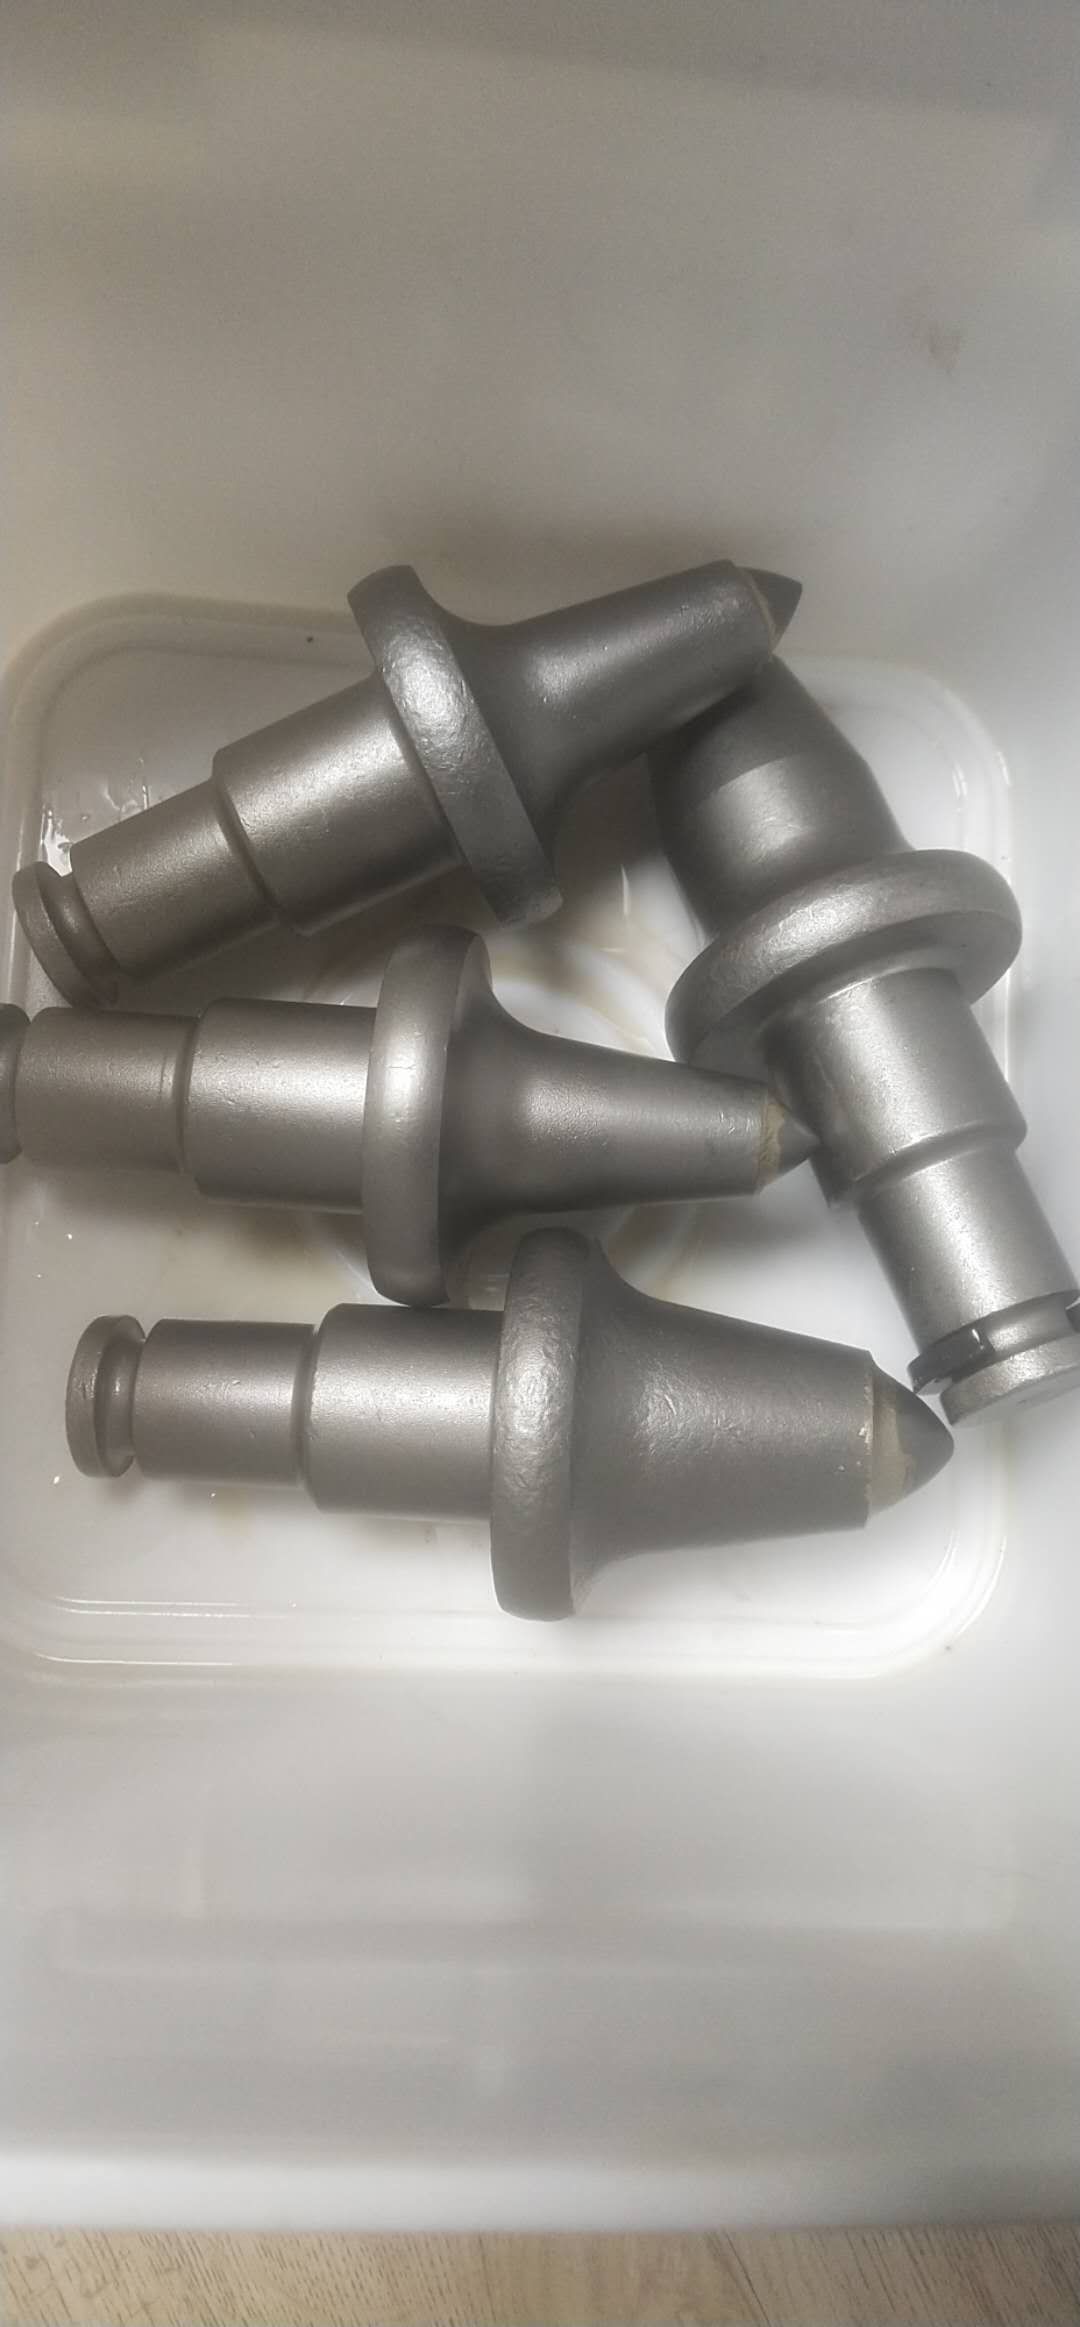 TS5 Trencher Conical Bits